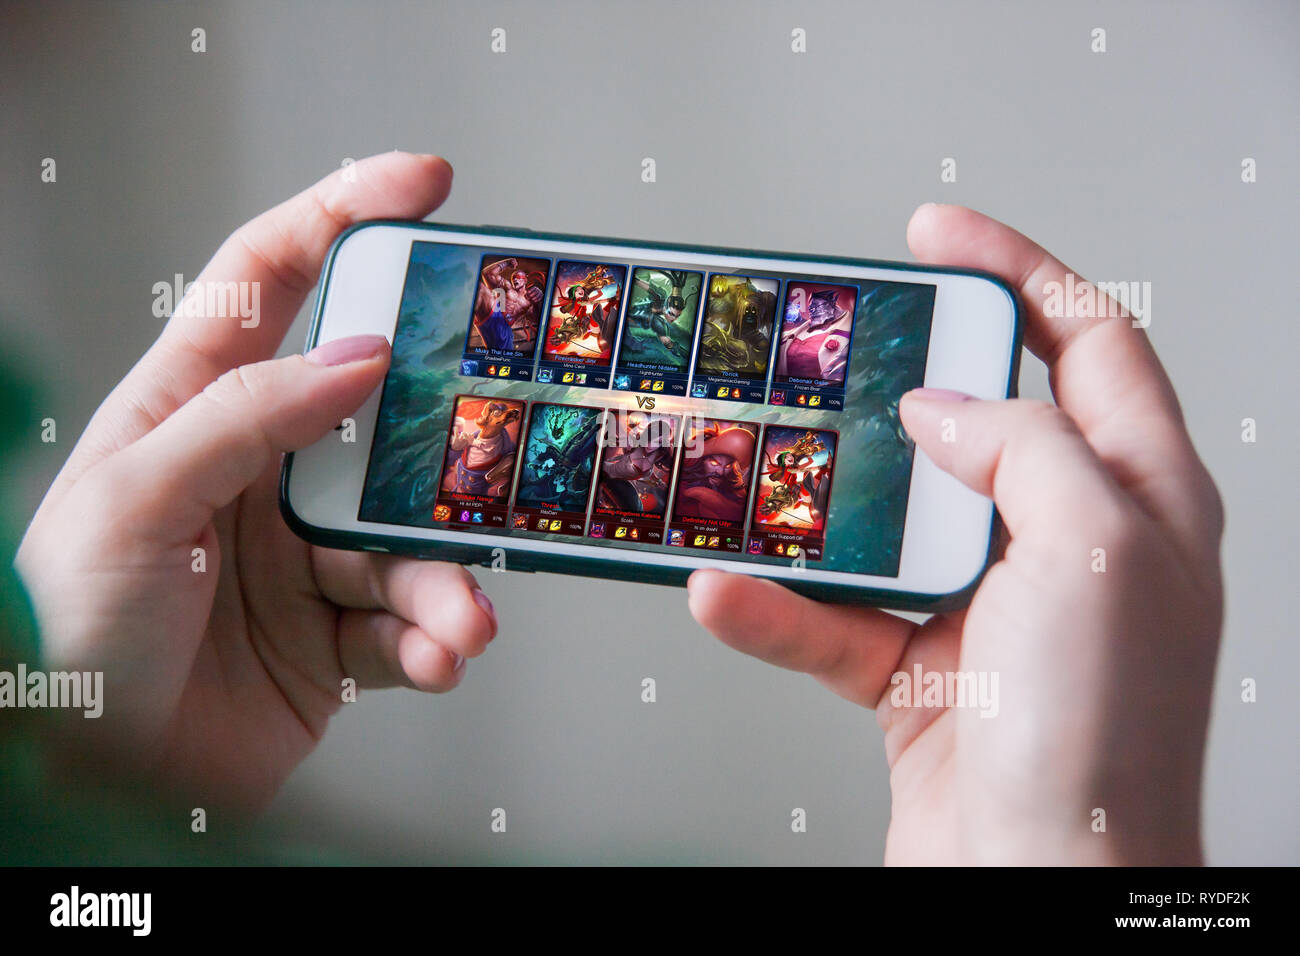 Los Angeles, California, USA - 25 February 2019: Hands holding a smartphone with League of Legends game on screen, Illustrative Editorial Stock Photo